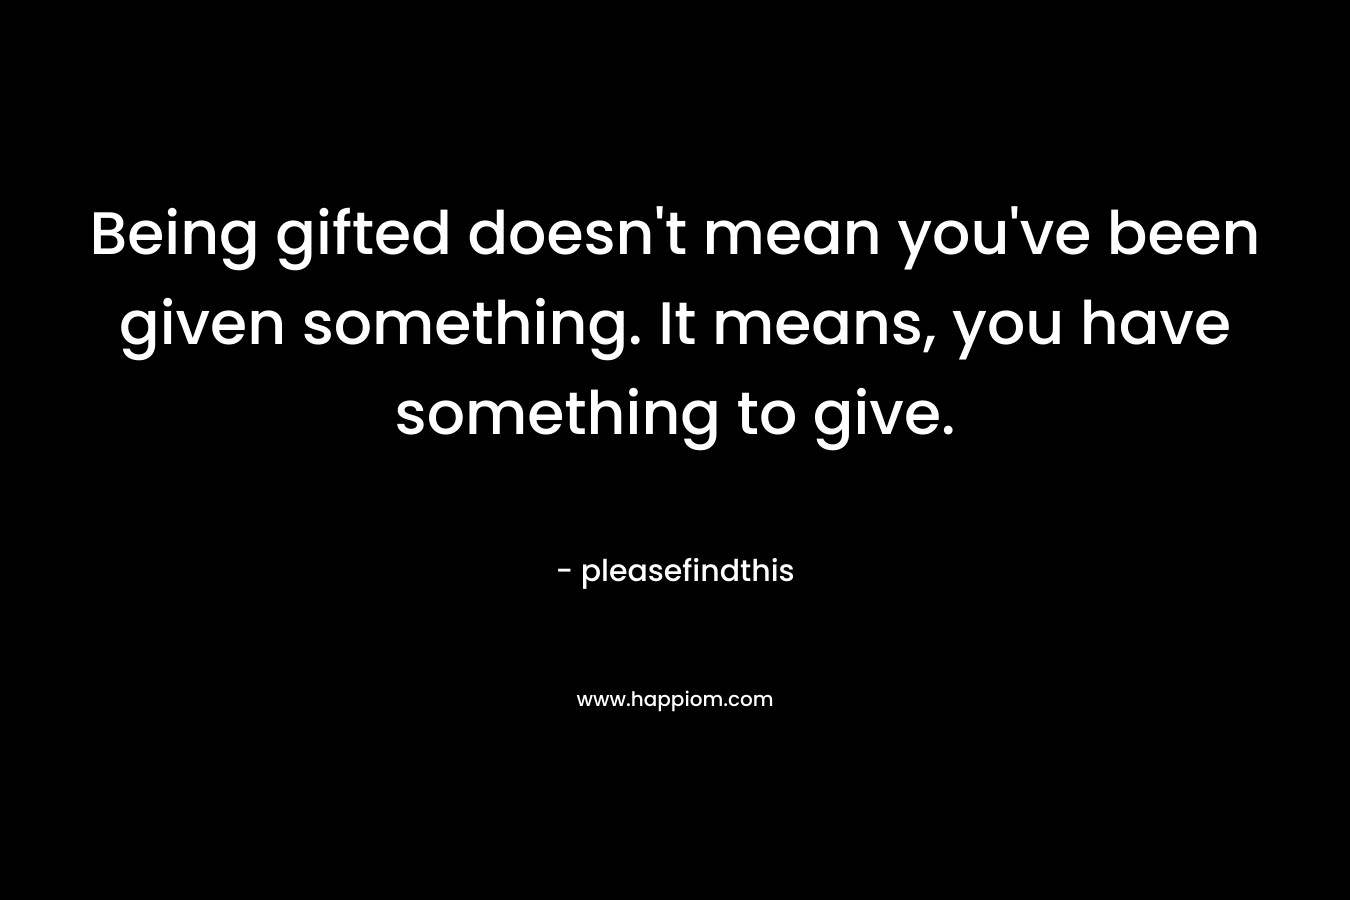 Being gifted doesn’t mean you’ve been given something. It means, you have something to give. – pleasefindthis